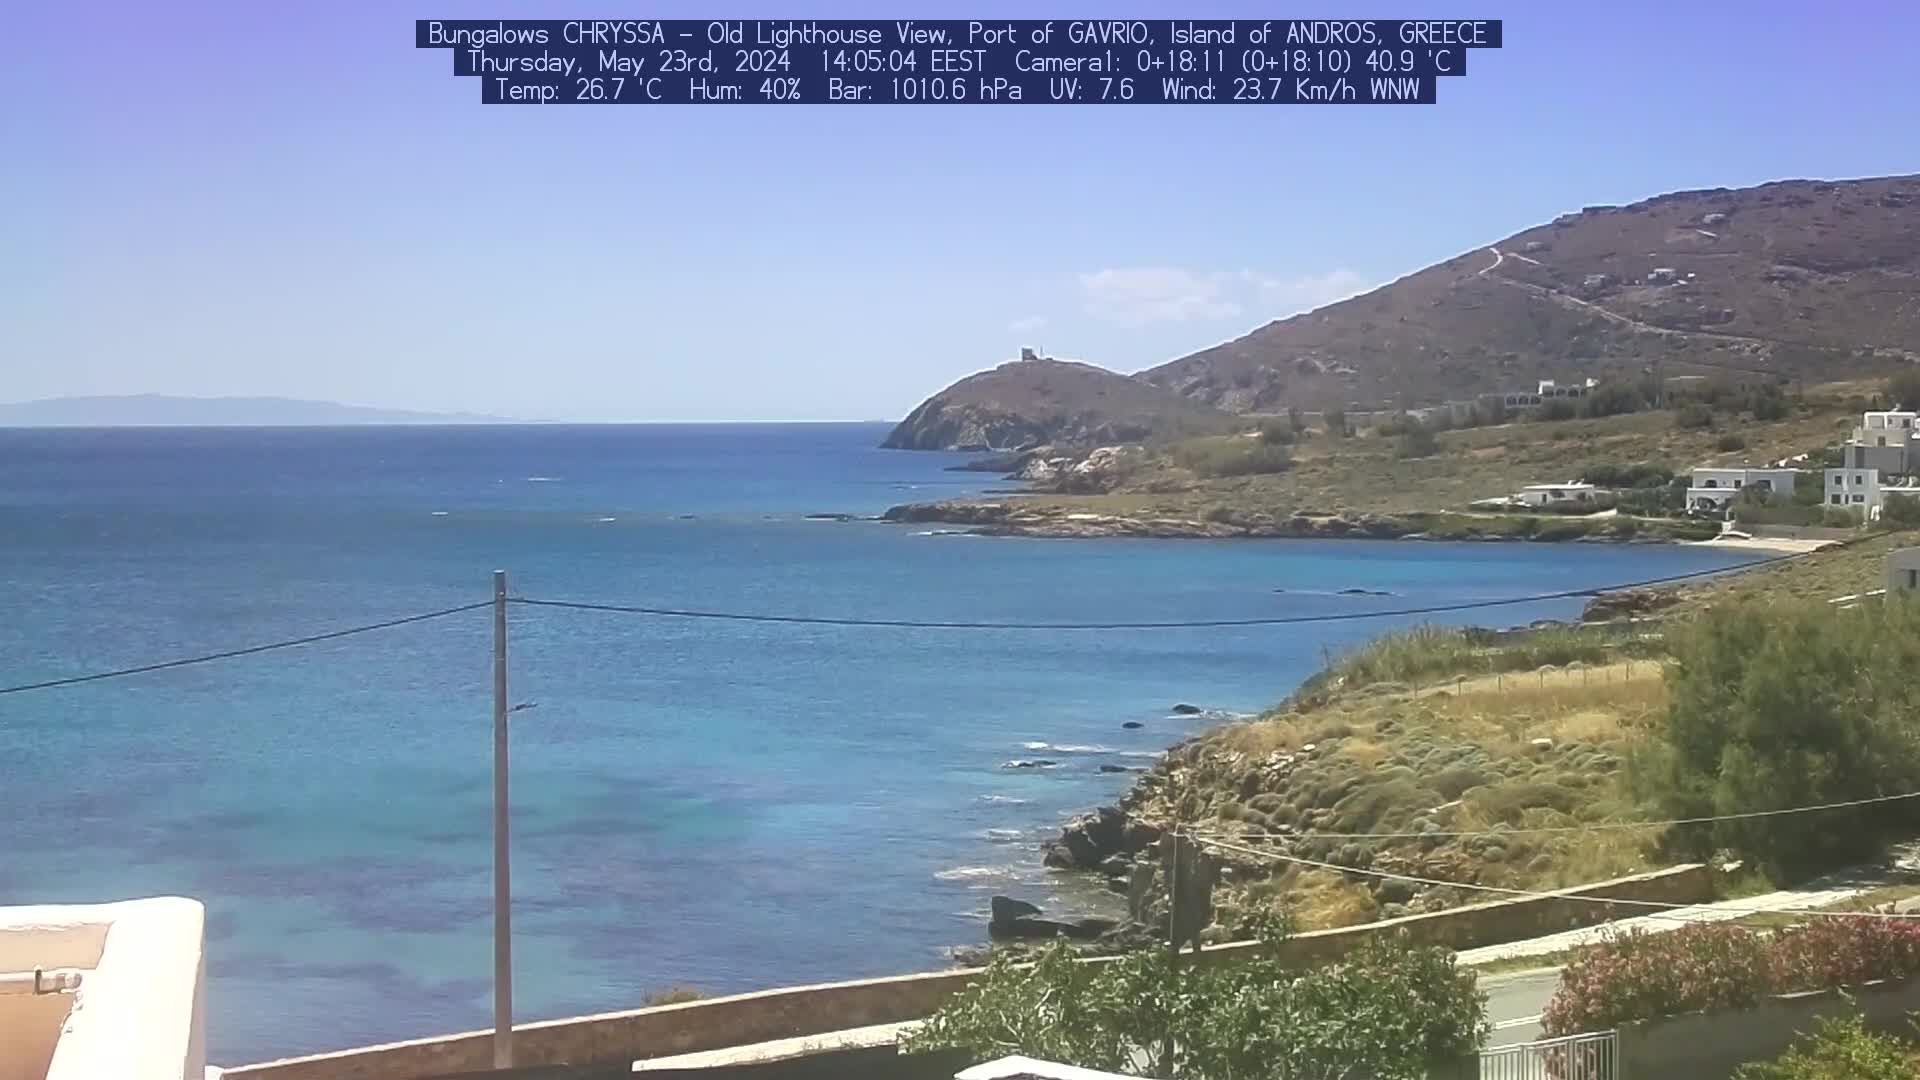 Gavrio (Andros) Wed. 14:05